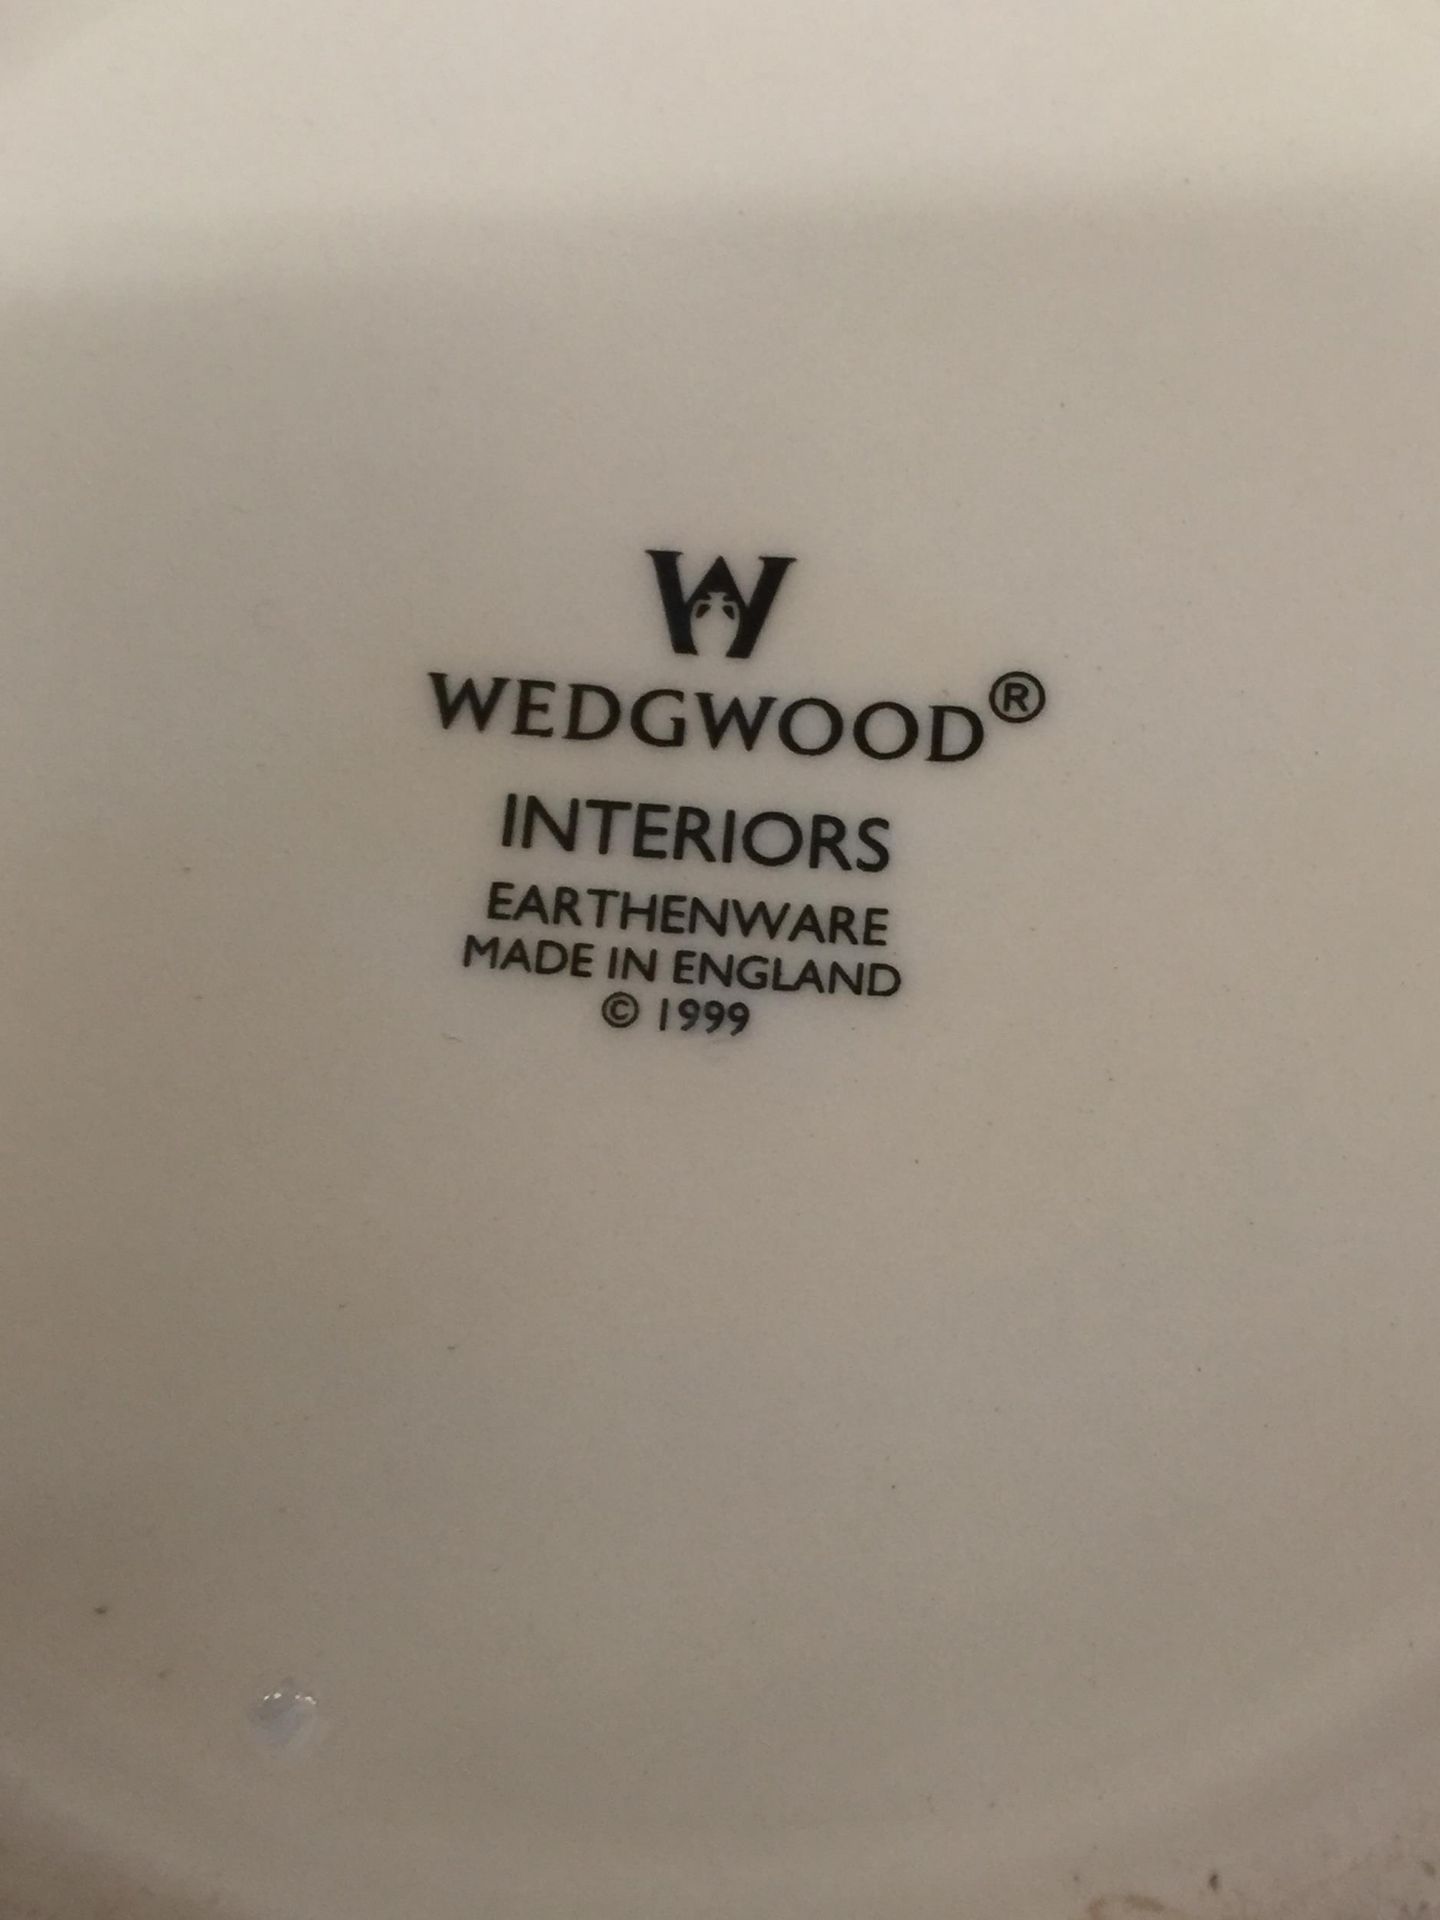 A WEDGWOOD INTERIORS EARTHENWARE VASE - Image 3 of 3